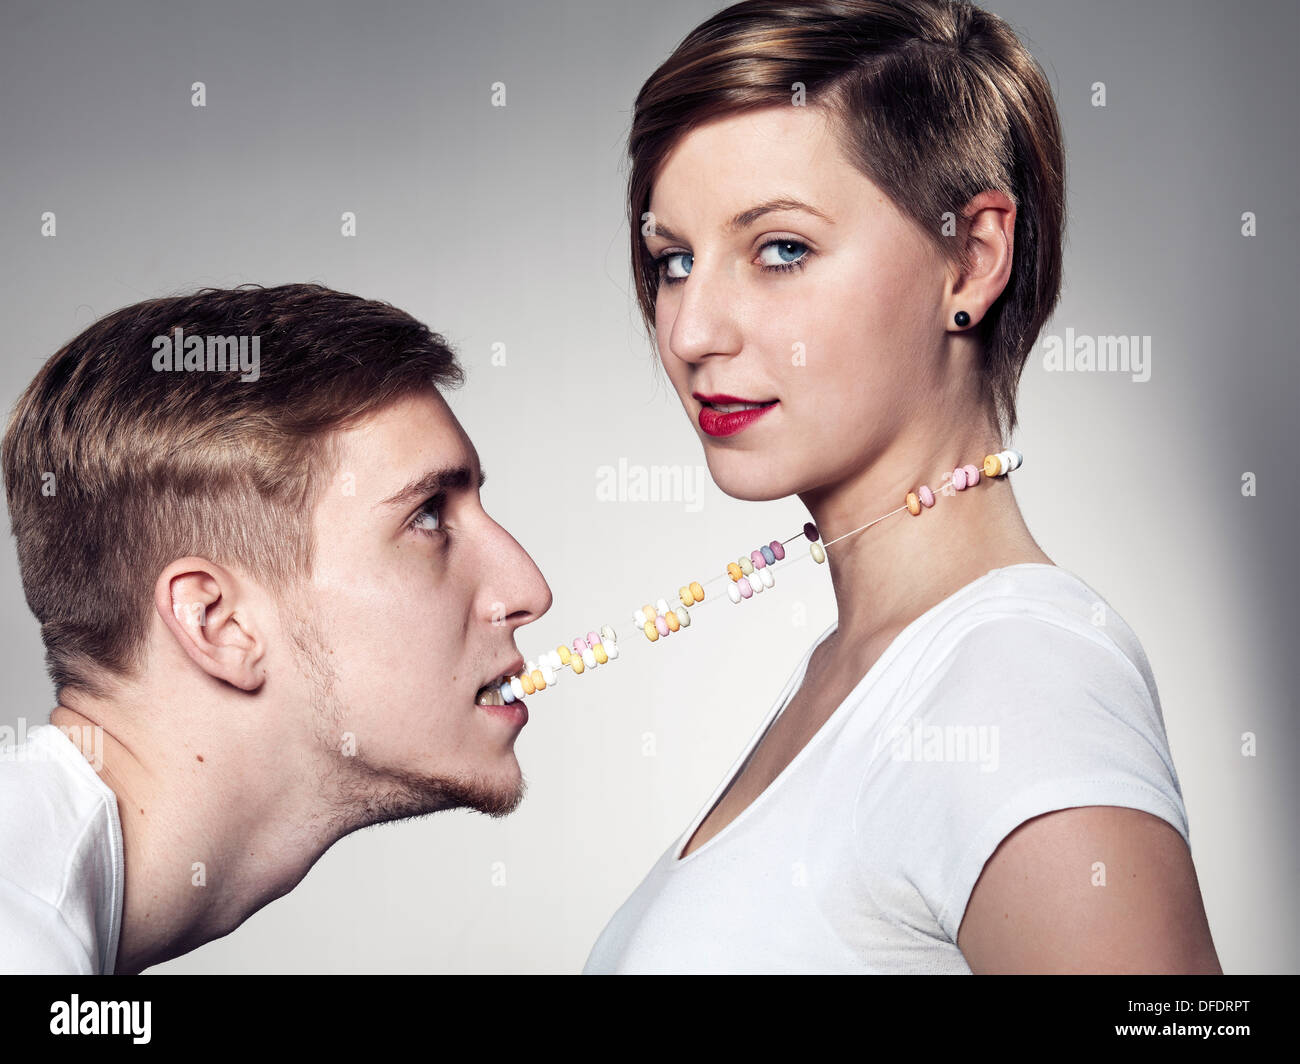 Young man biting candy necklace while woman looking at camera Stock Photo